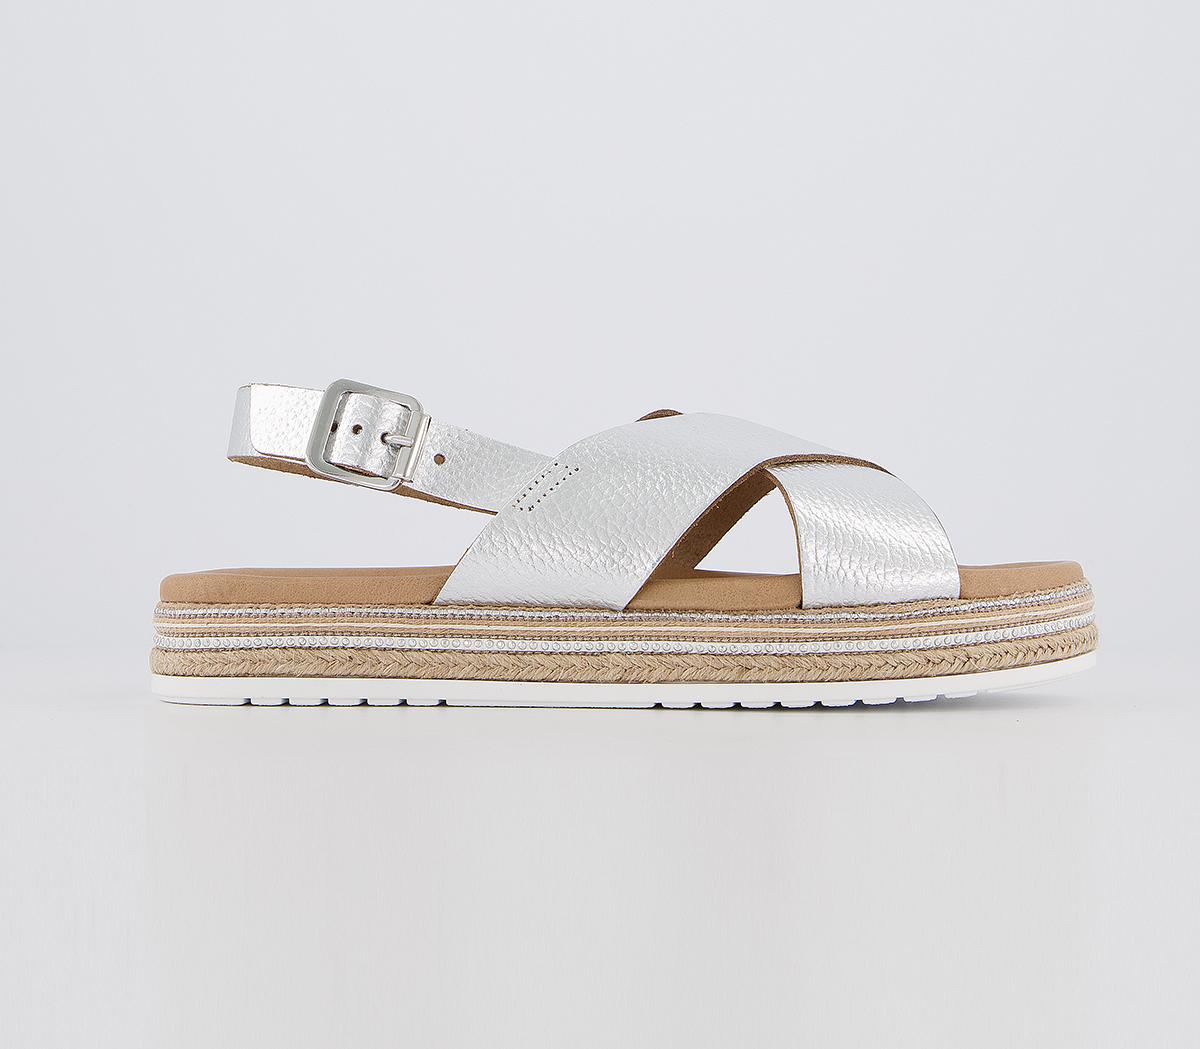 OFFICESunset  Espadrille SandalsSilver Tumbled Leather